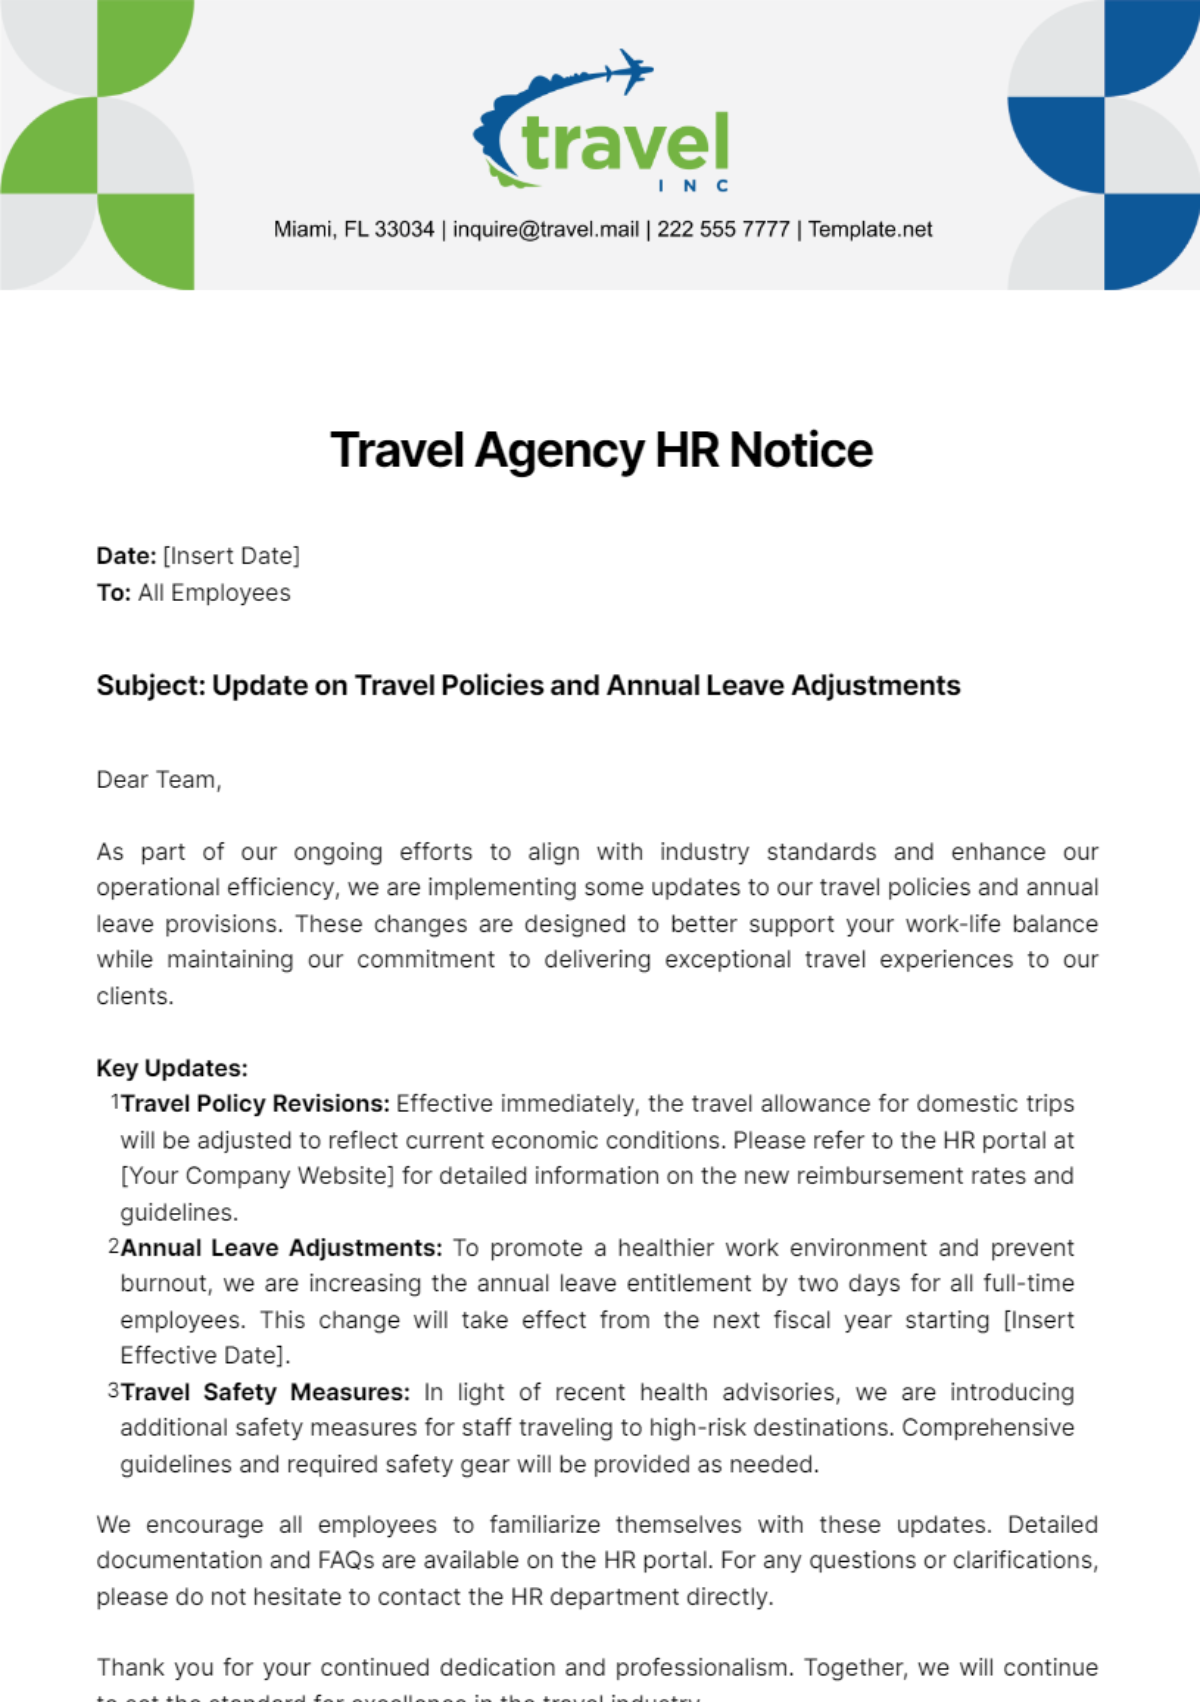 Free Travel Agency HR Notice Template